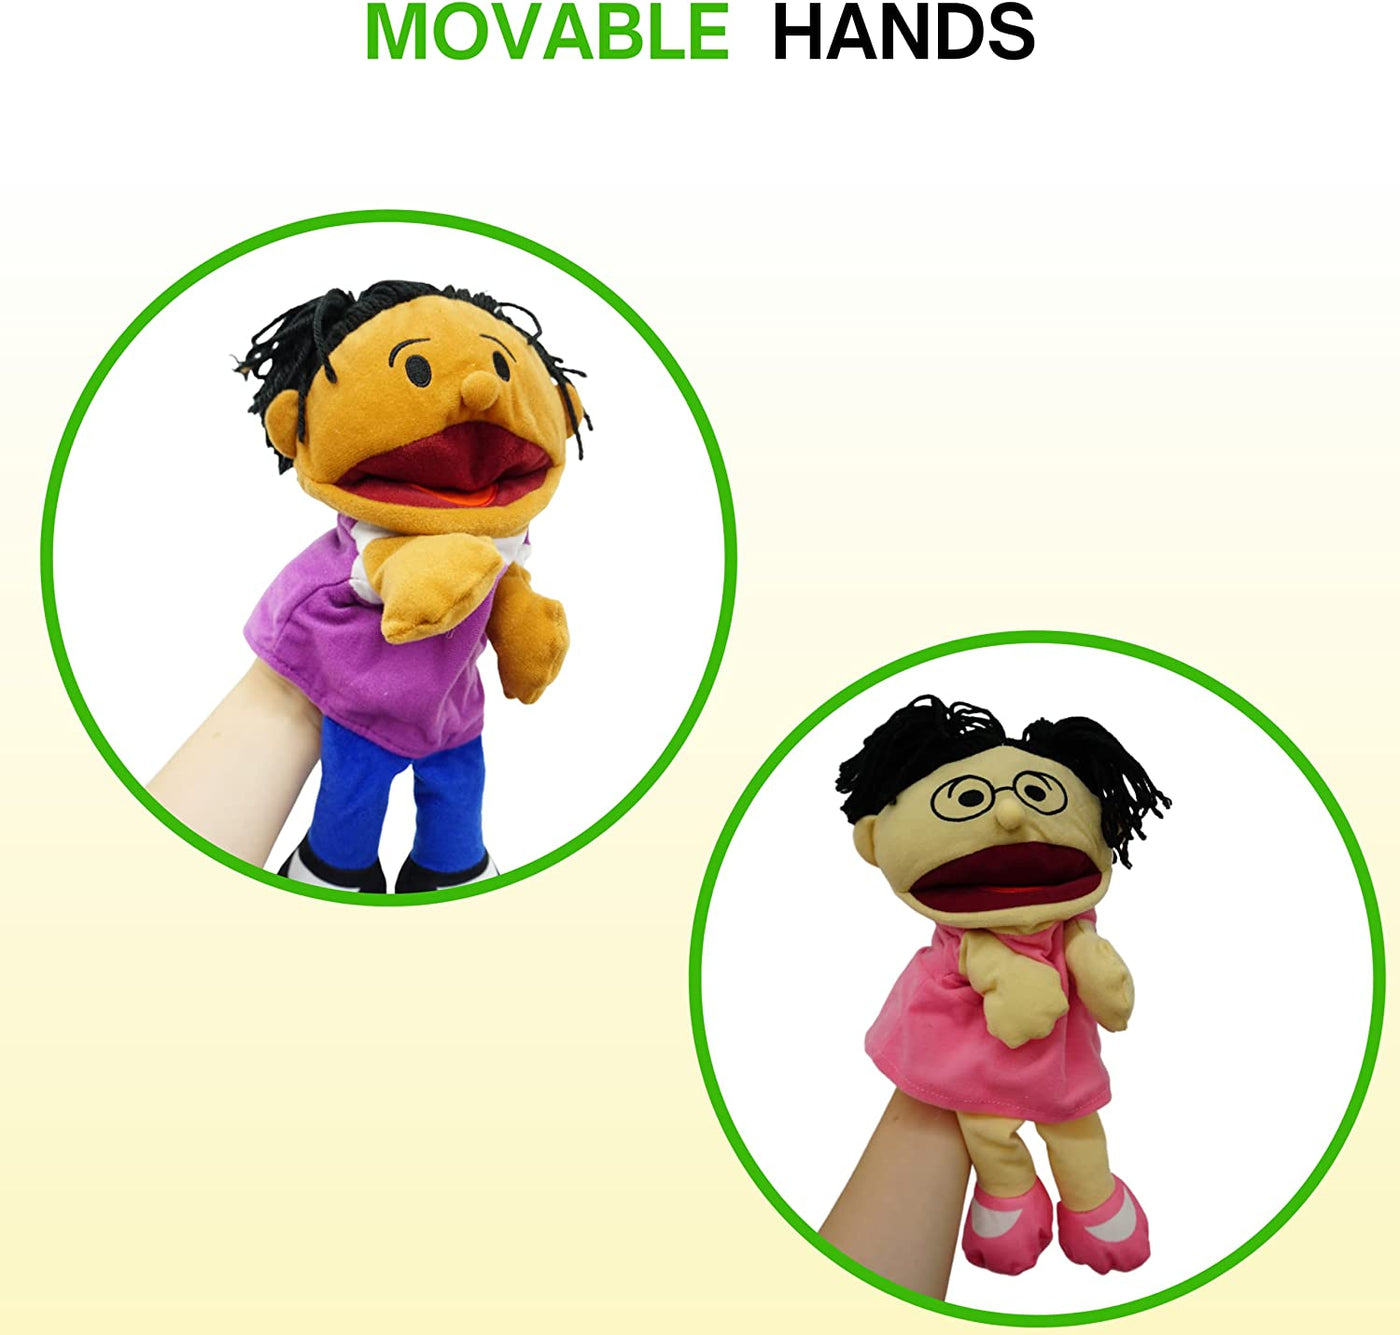 Hand Puppets for Kids, Multicultural Puppets with Movable Mouth (8 Pack) Soft Plush Puppets Fits Toddlers & Kids for School, Home Puppet Theater Shows, Classroom Toys, Great Gift Idea by 4E's Novelty